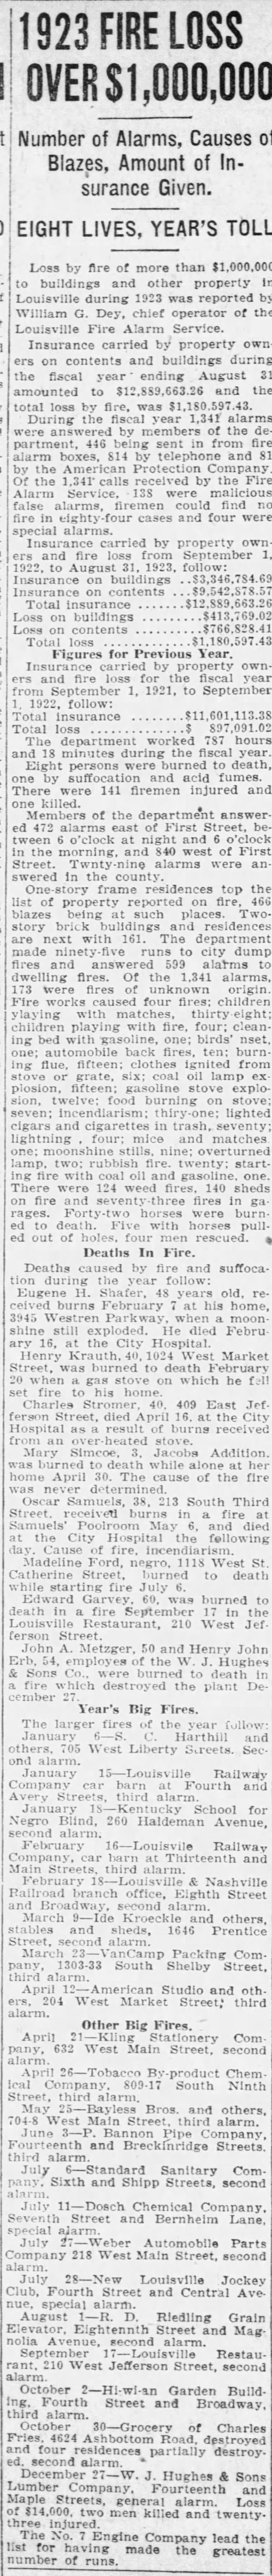 1924-01-02 - LFD fire losses for 1923